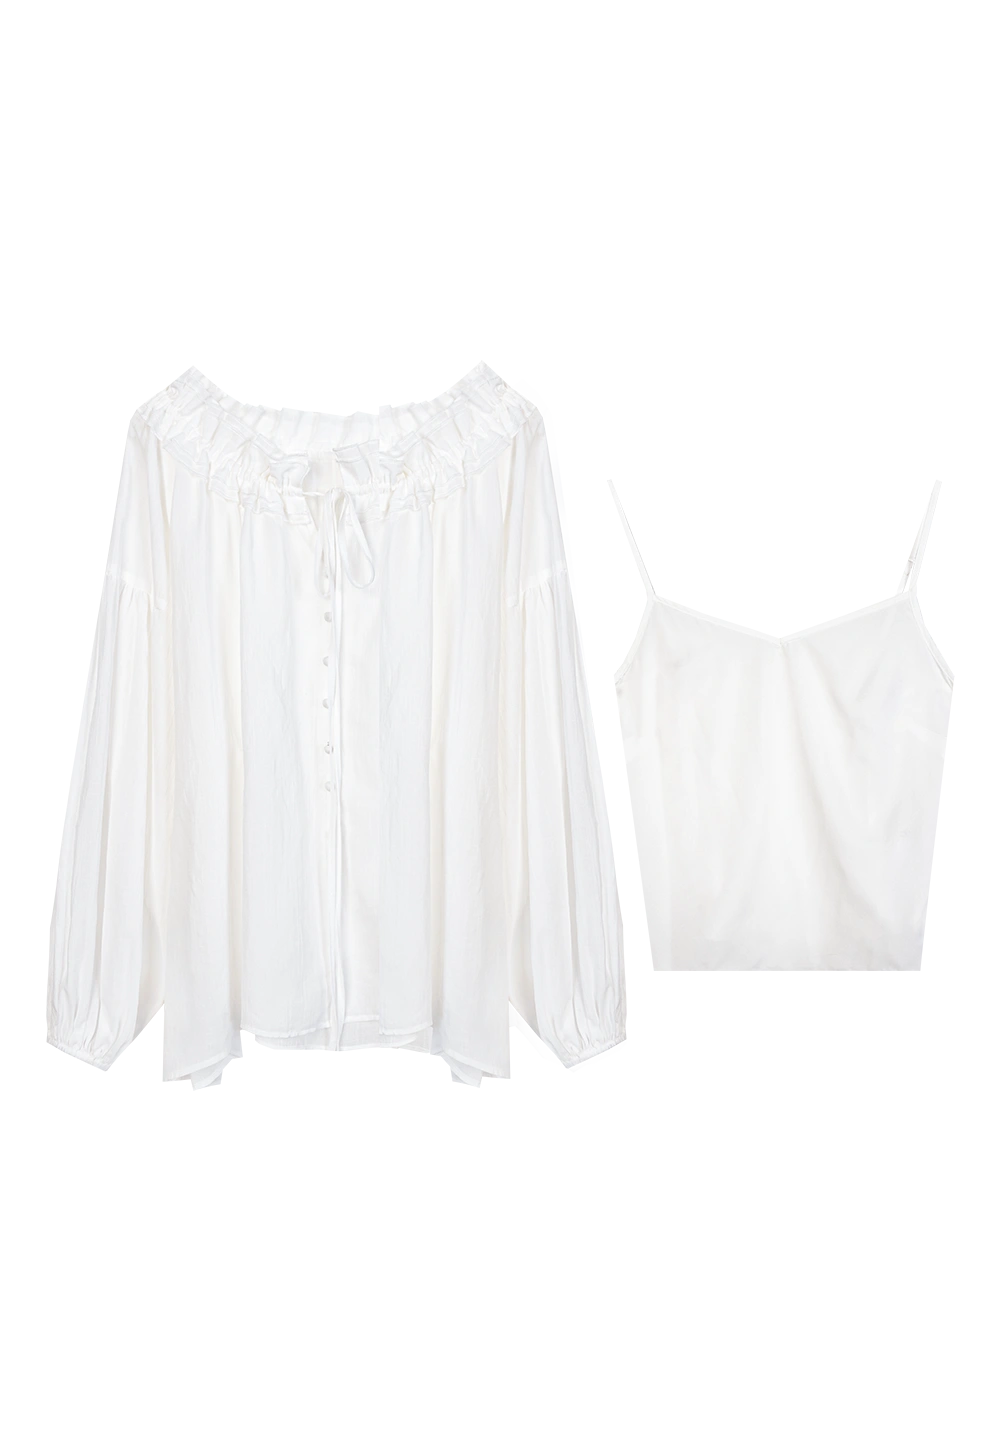 Women's Two-Piece Set: Spaghetti Strap Cami and Long Sleeve Button-Up Blouse